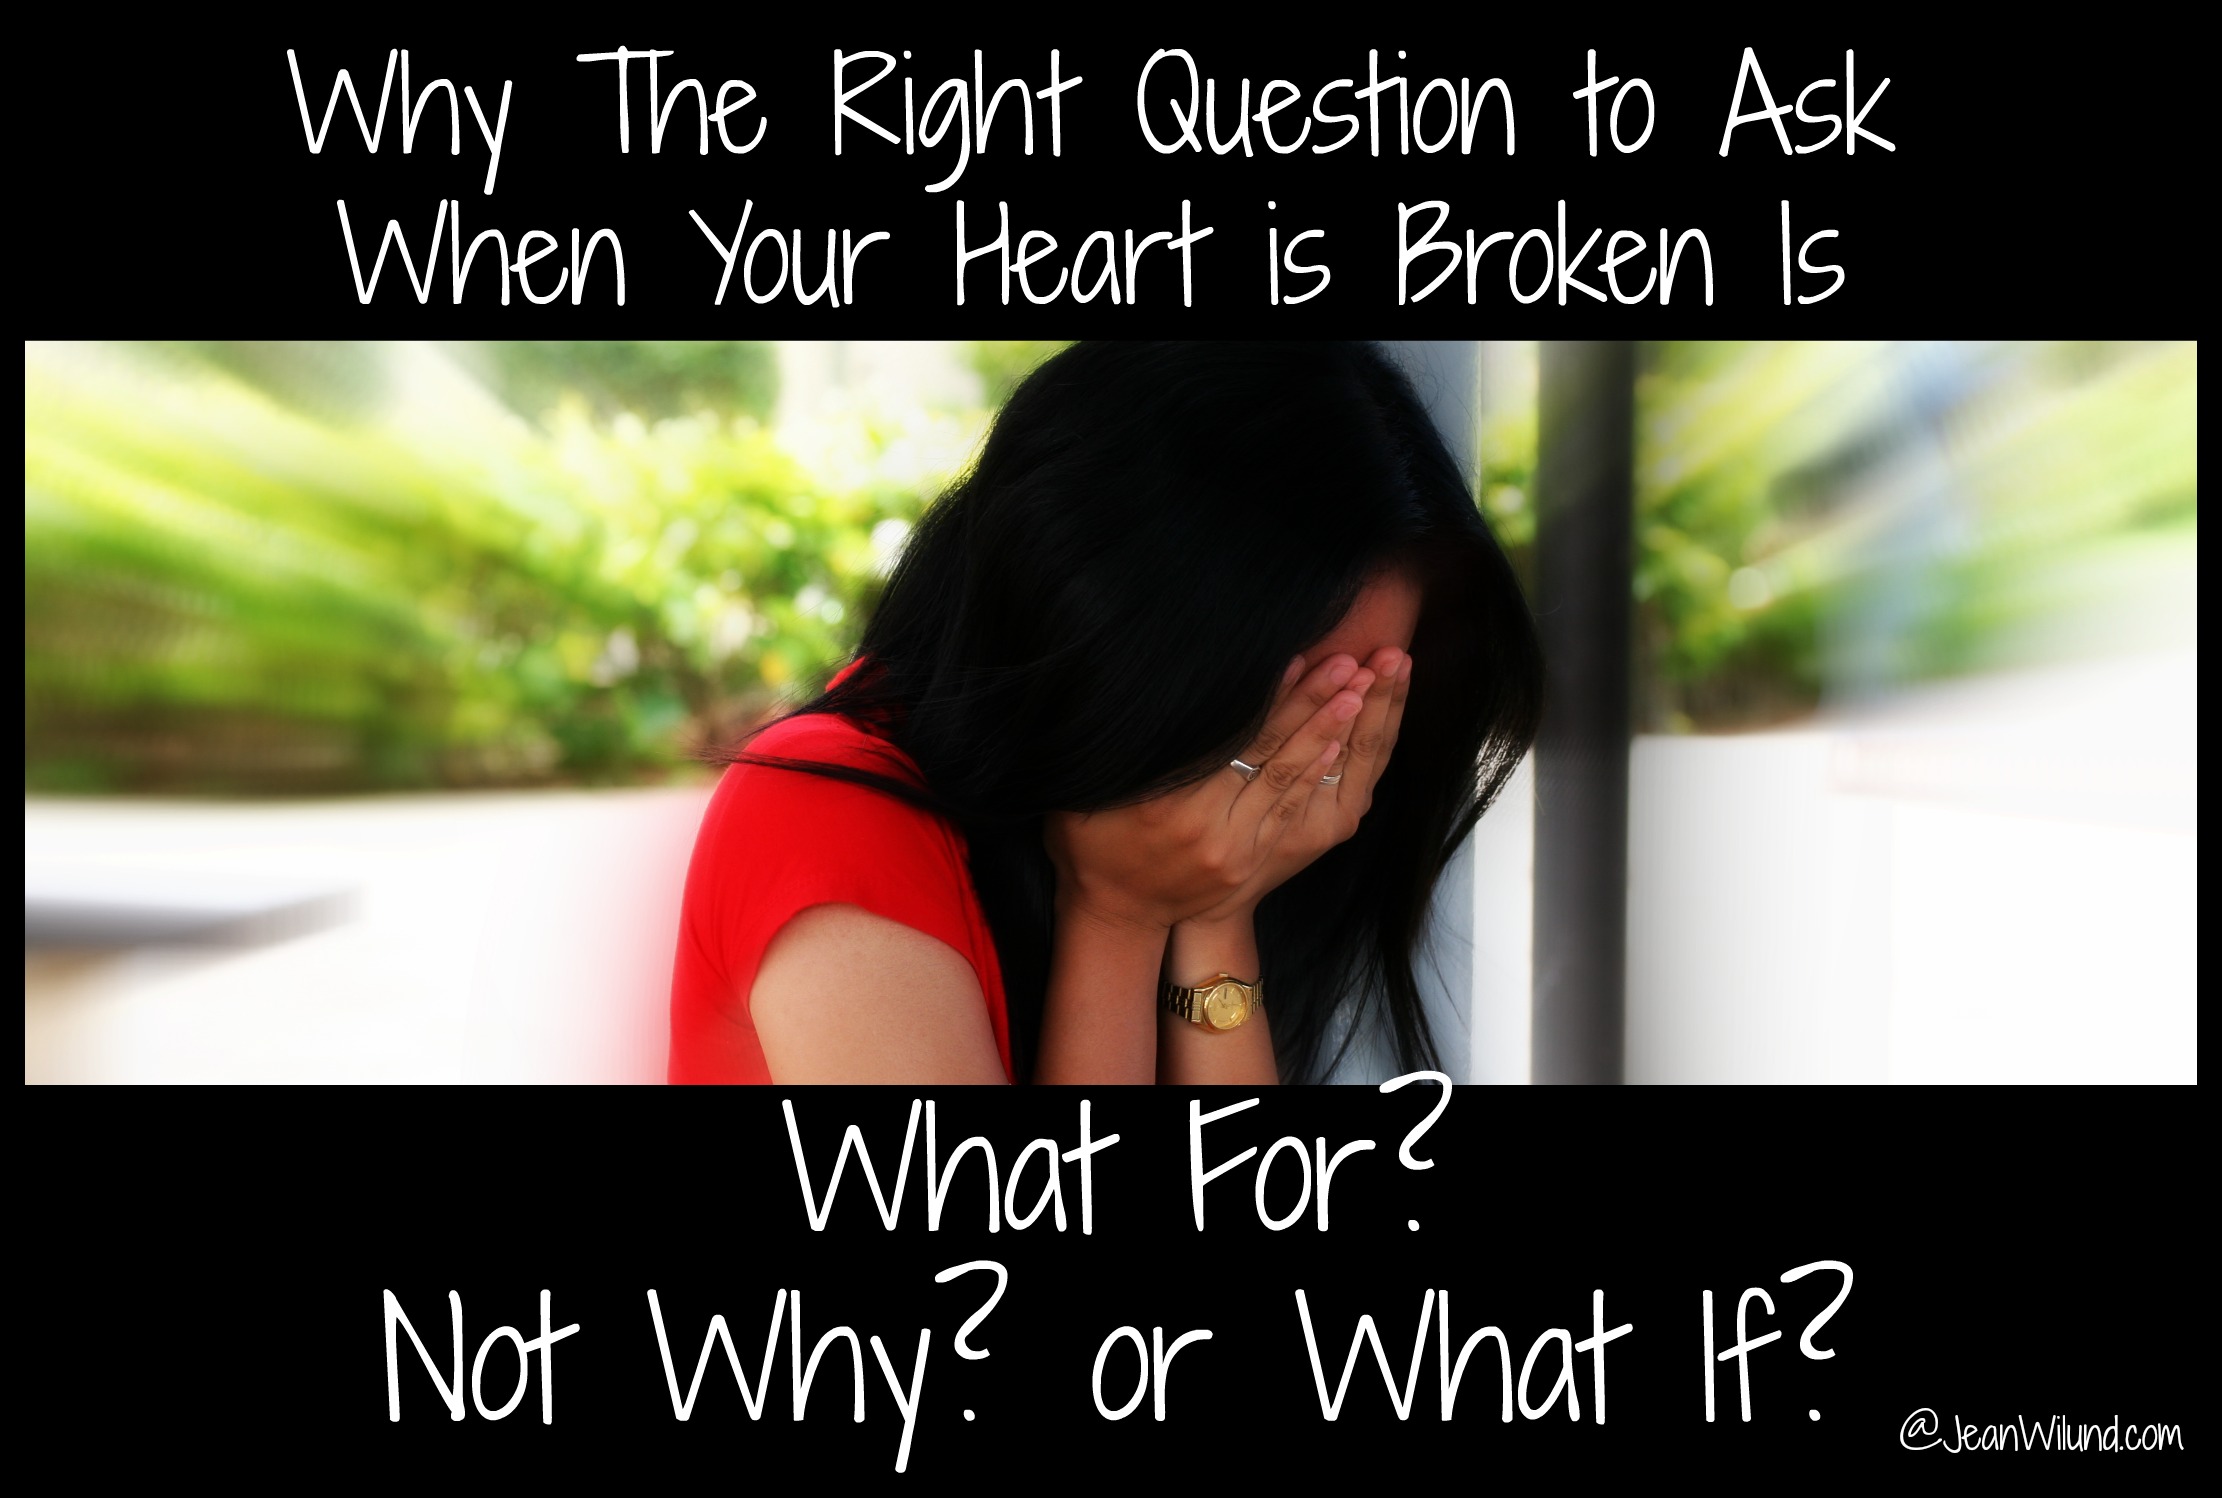 Why the Right Question to Ask When Your Heart is Broken is "What For?" not "Why?" or "What if?"